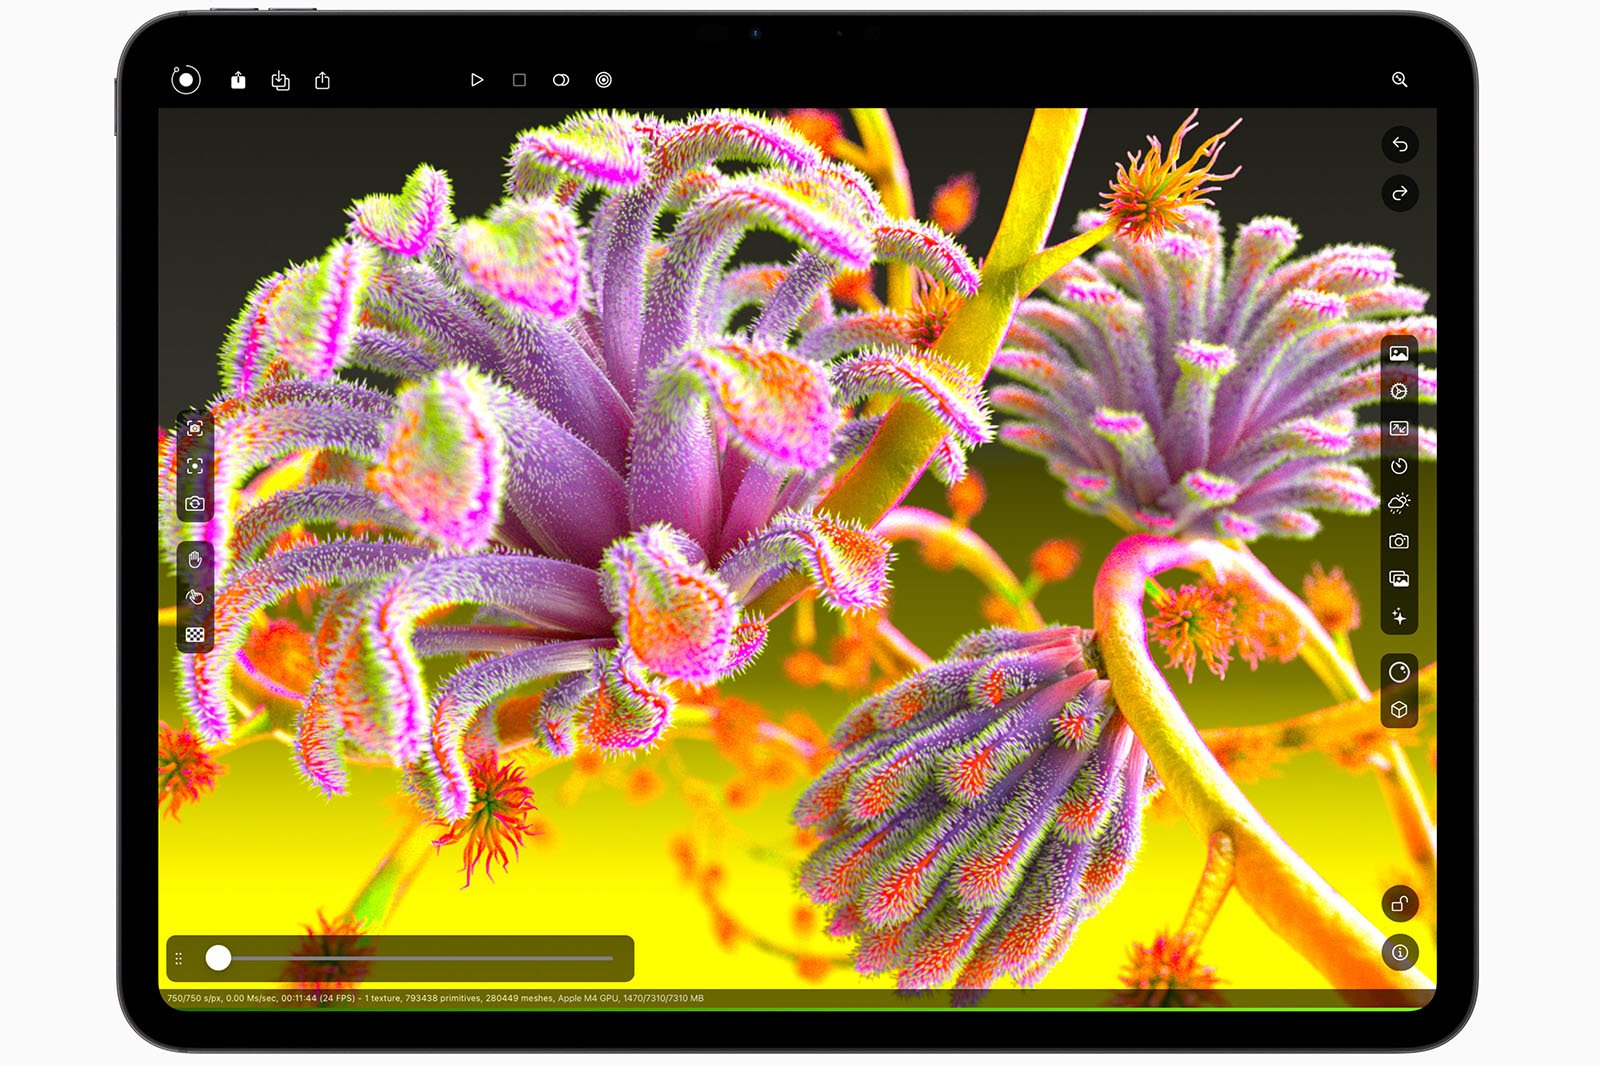 A digital illustration of vibrant purple and green succulent plants displayed on a tablet screen with various editing tools visible along the screen's edges.